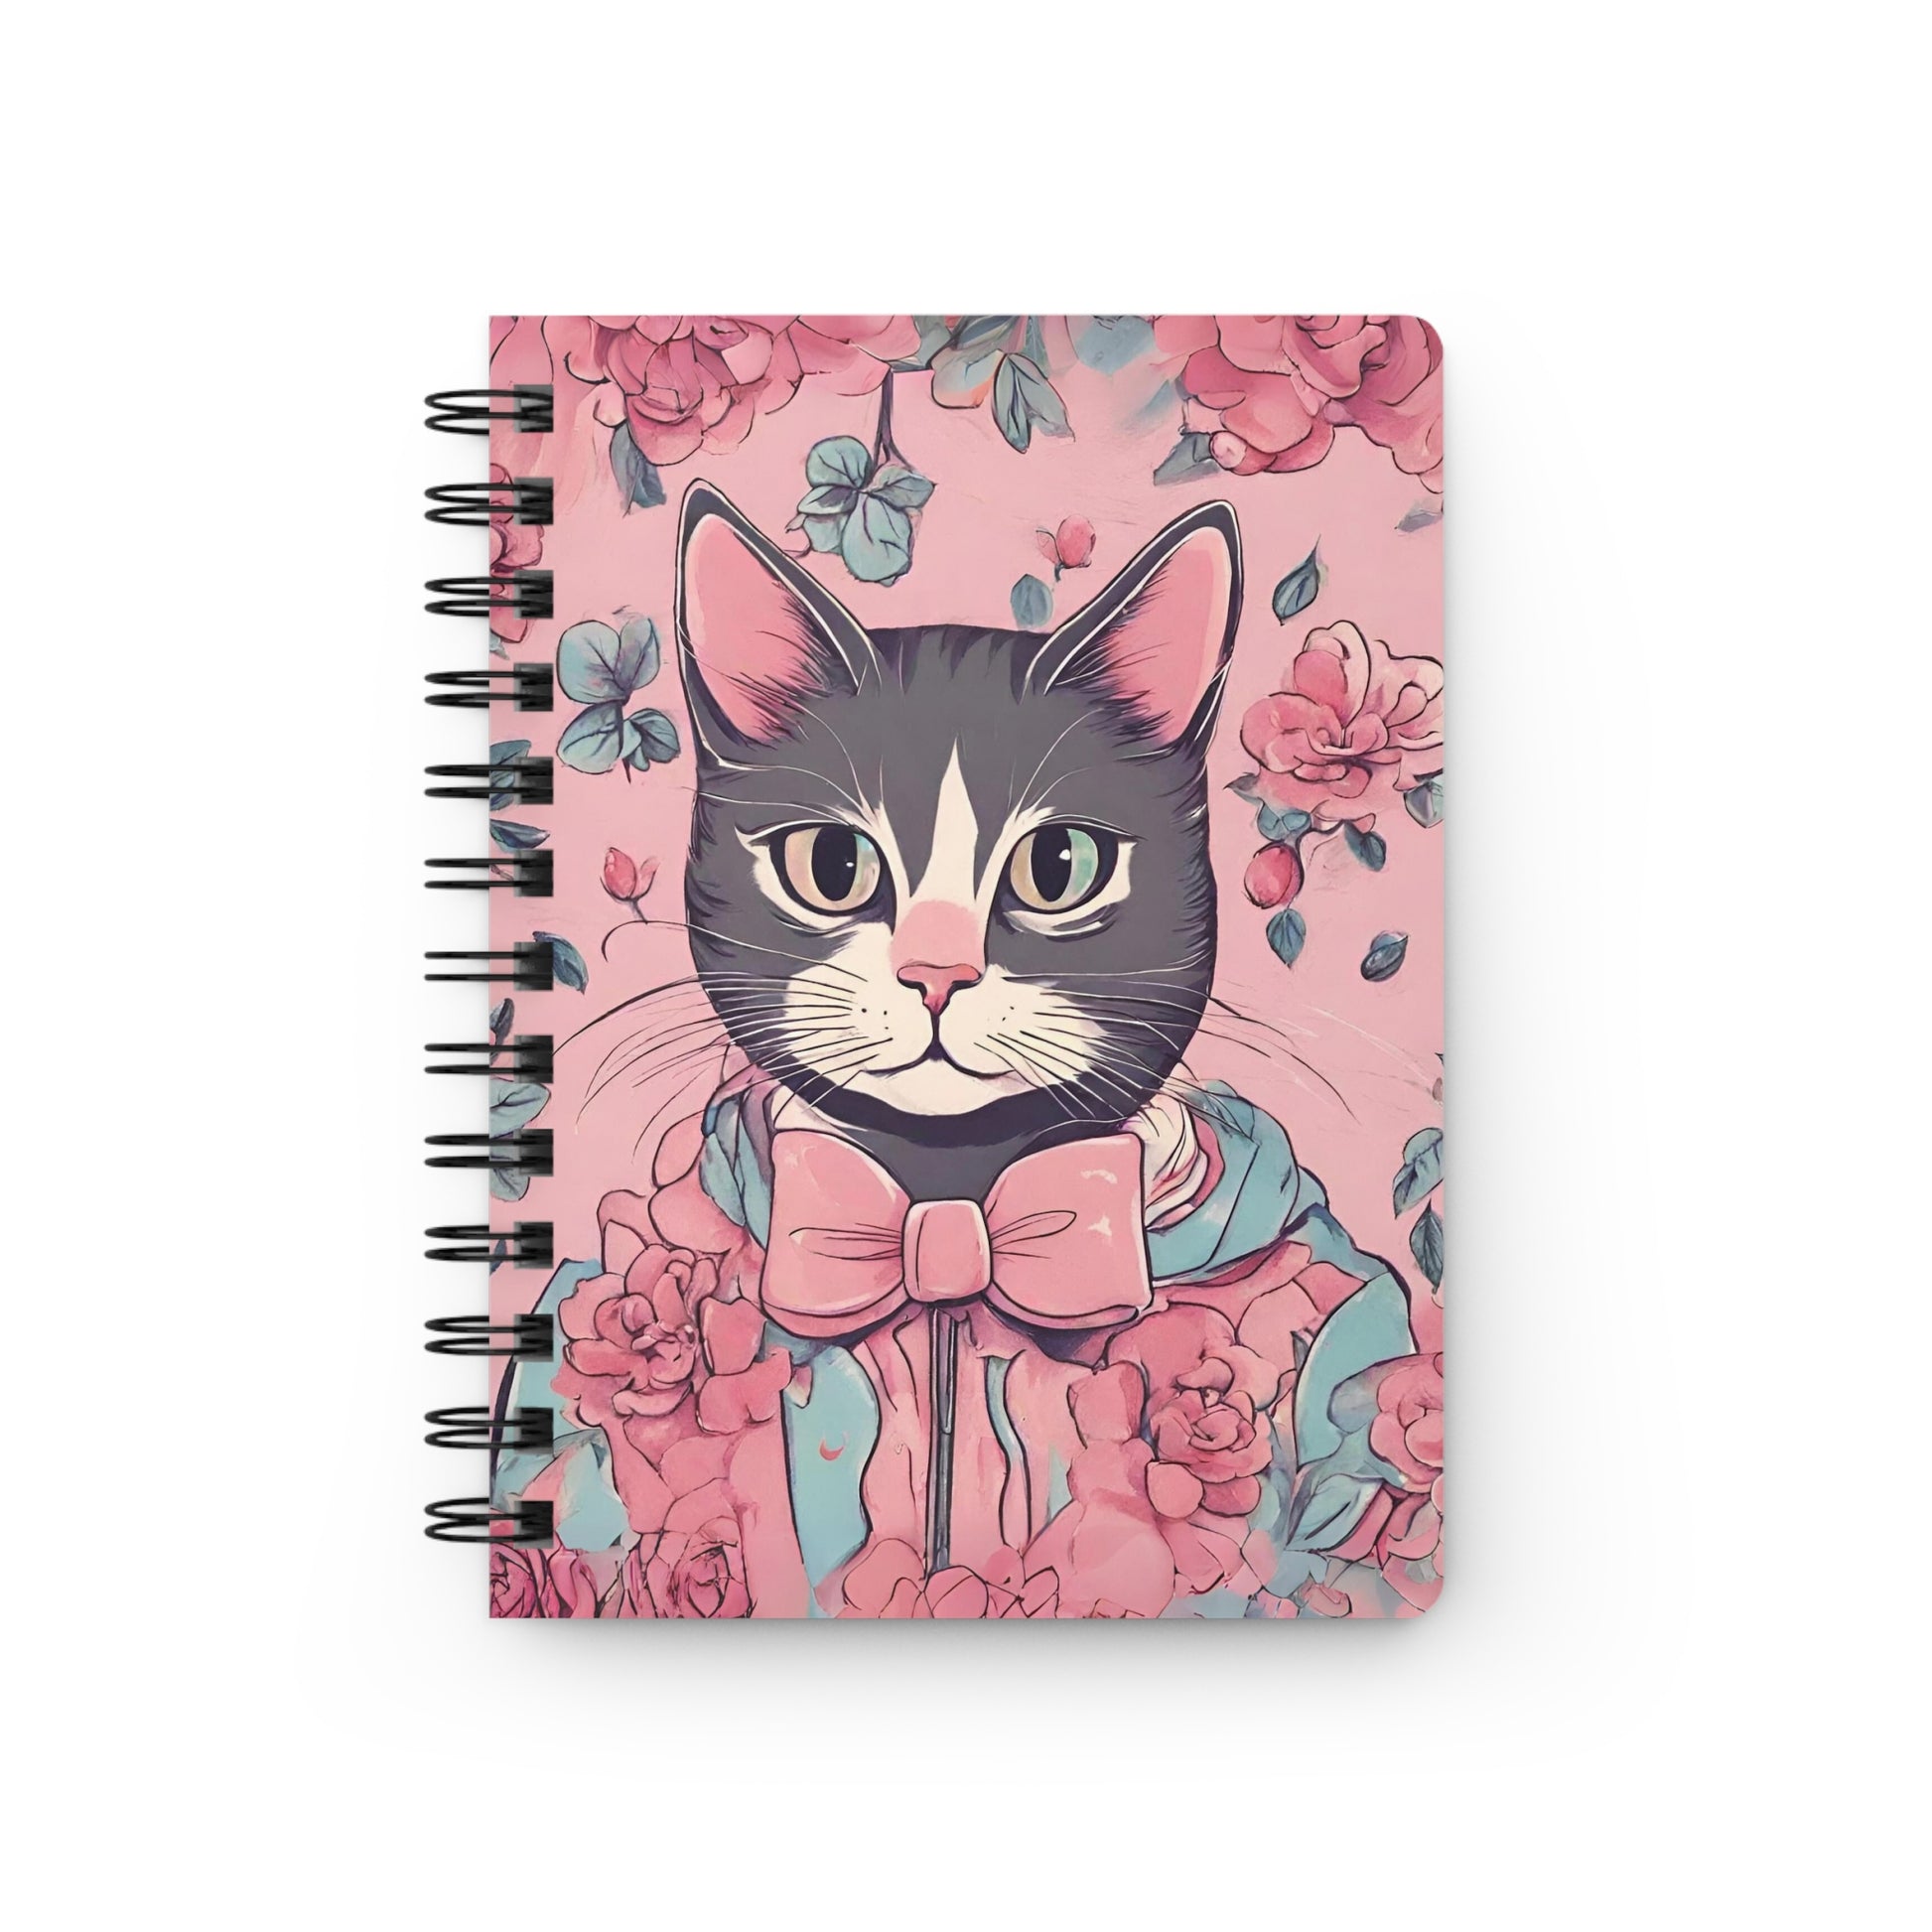 Floral Cat Spiral Journal, Victorian Cat Notebook, Cute vintage cat Journal, cat lover gift, Cottagecore aesthetic journal, Back to school